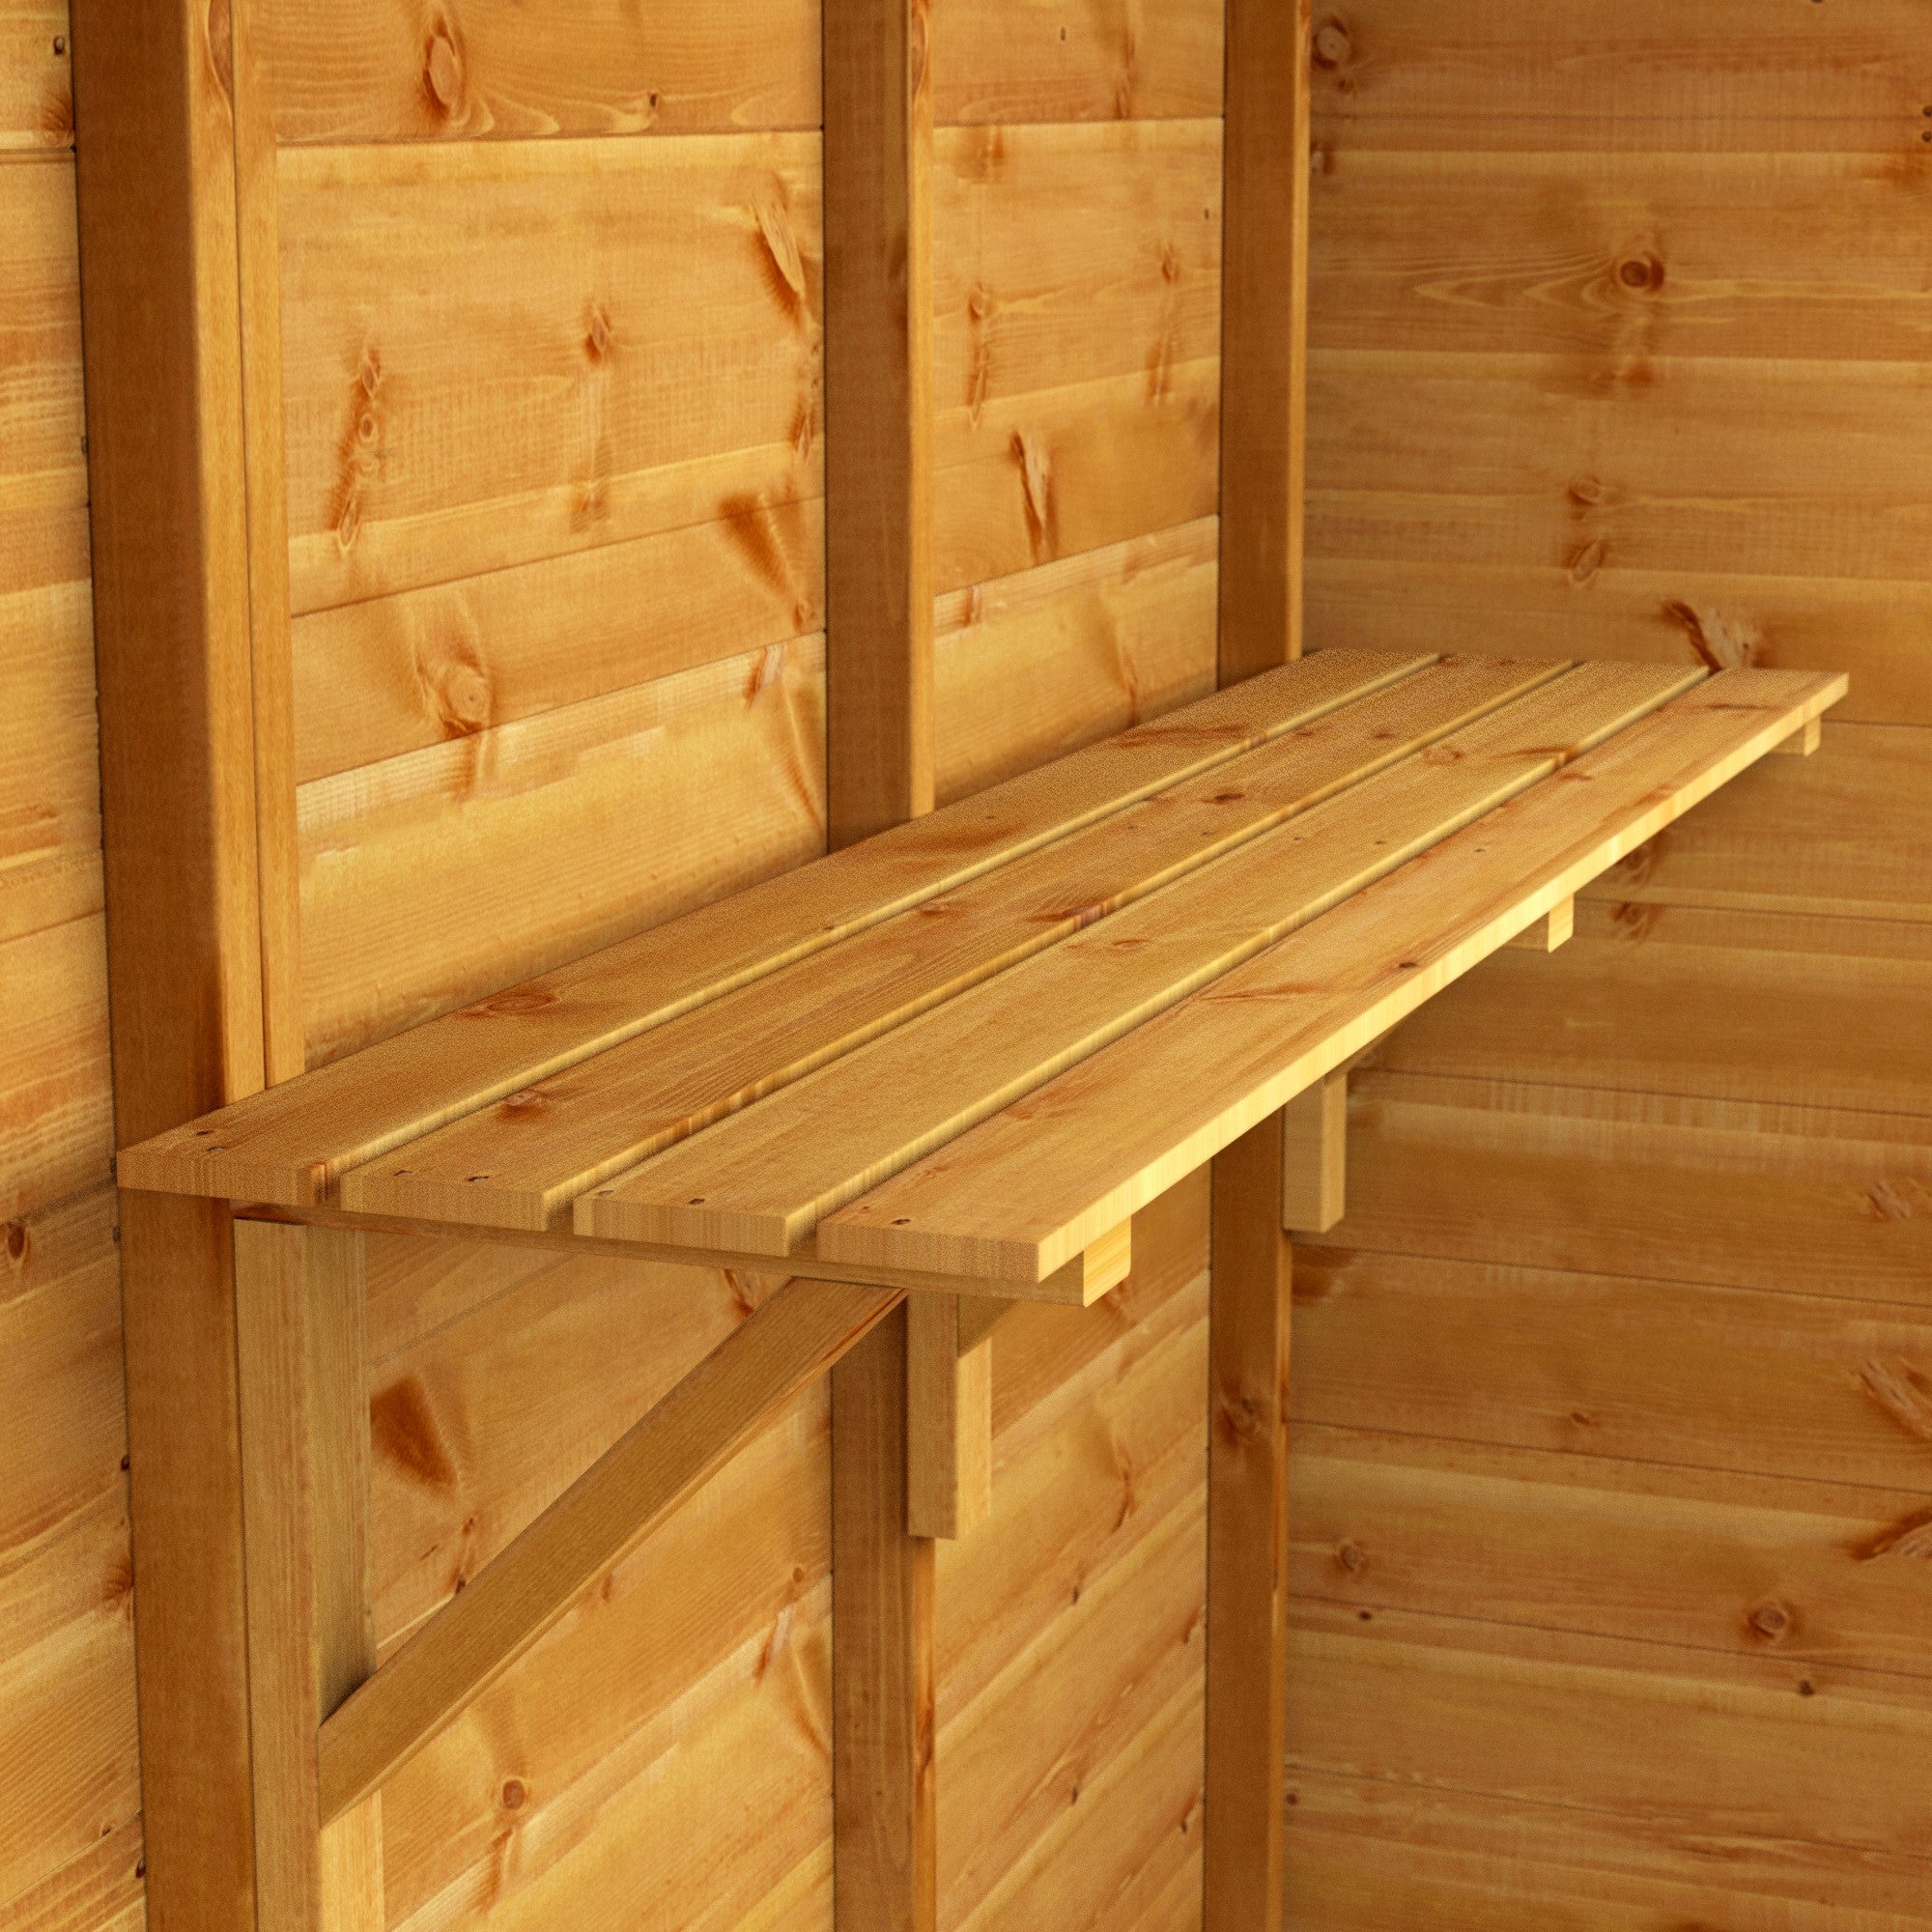 Power Accessories - Shelving, Staging, Shed Key, Pressure Treated Planter, Paint & Racking